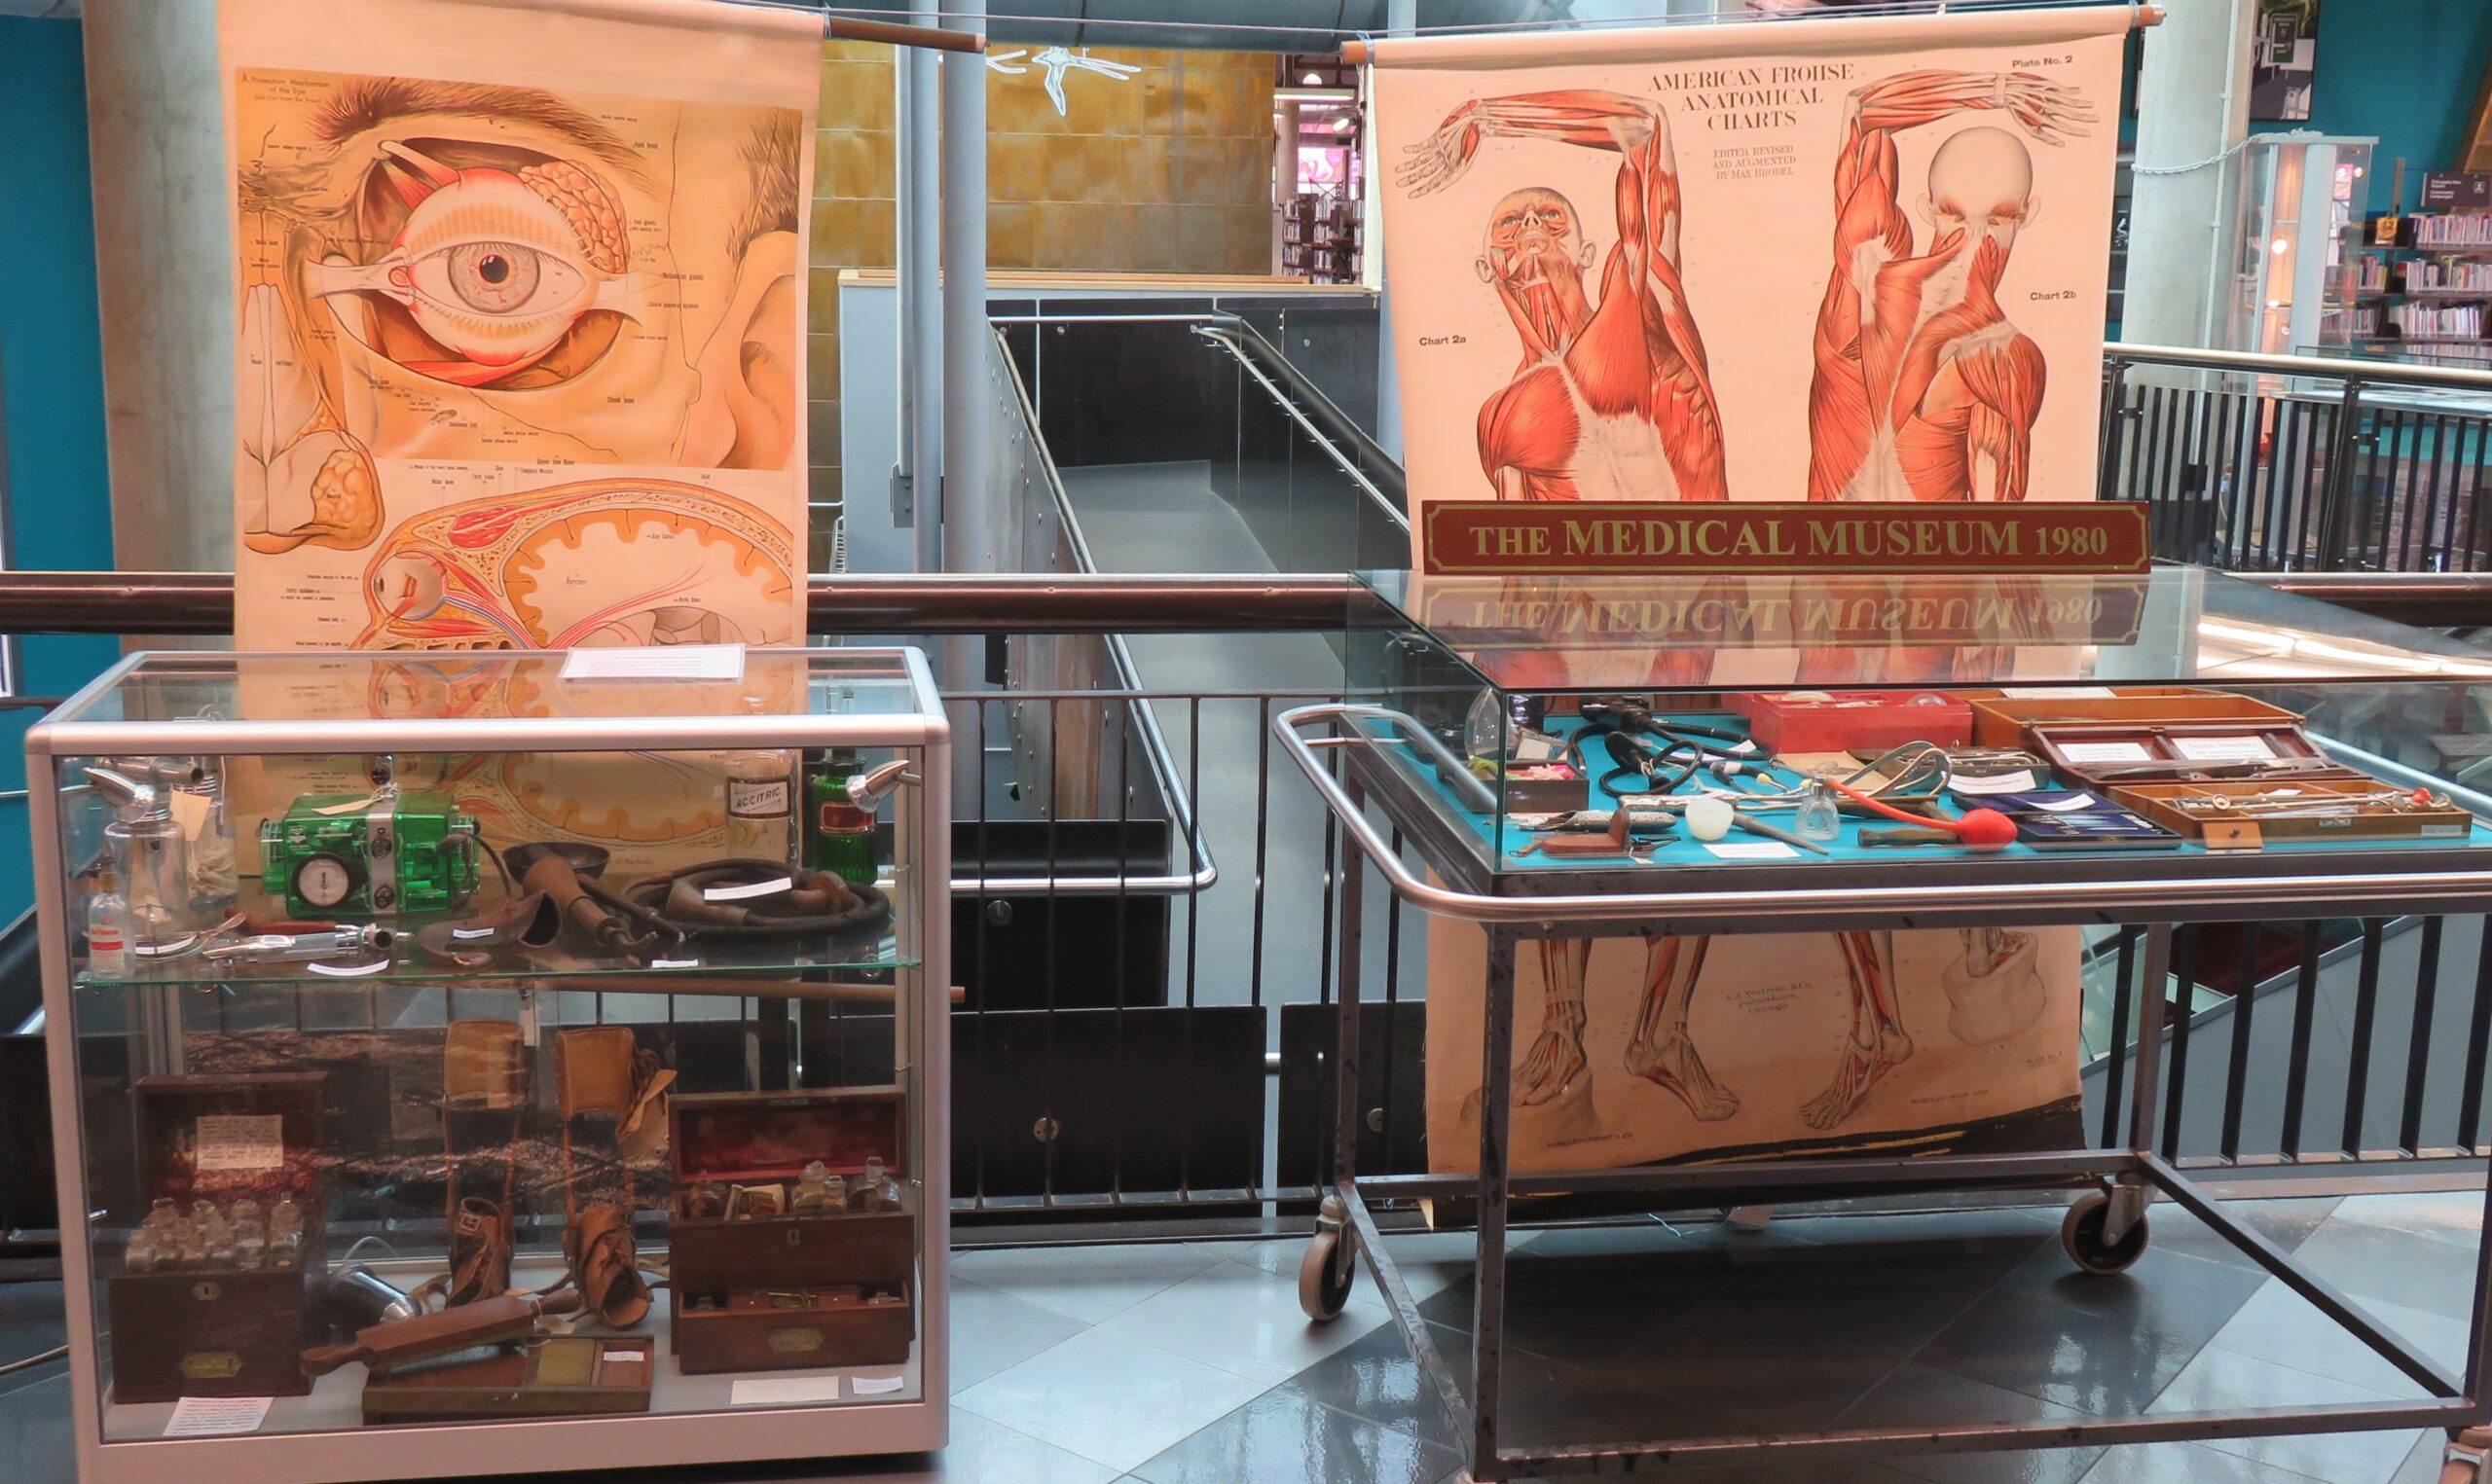 Image depicts two glass display cabinets with historical medical equipment on display within. Two anatomical charts hang behind them showing human muscle structure, including optical nerve structure.